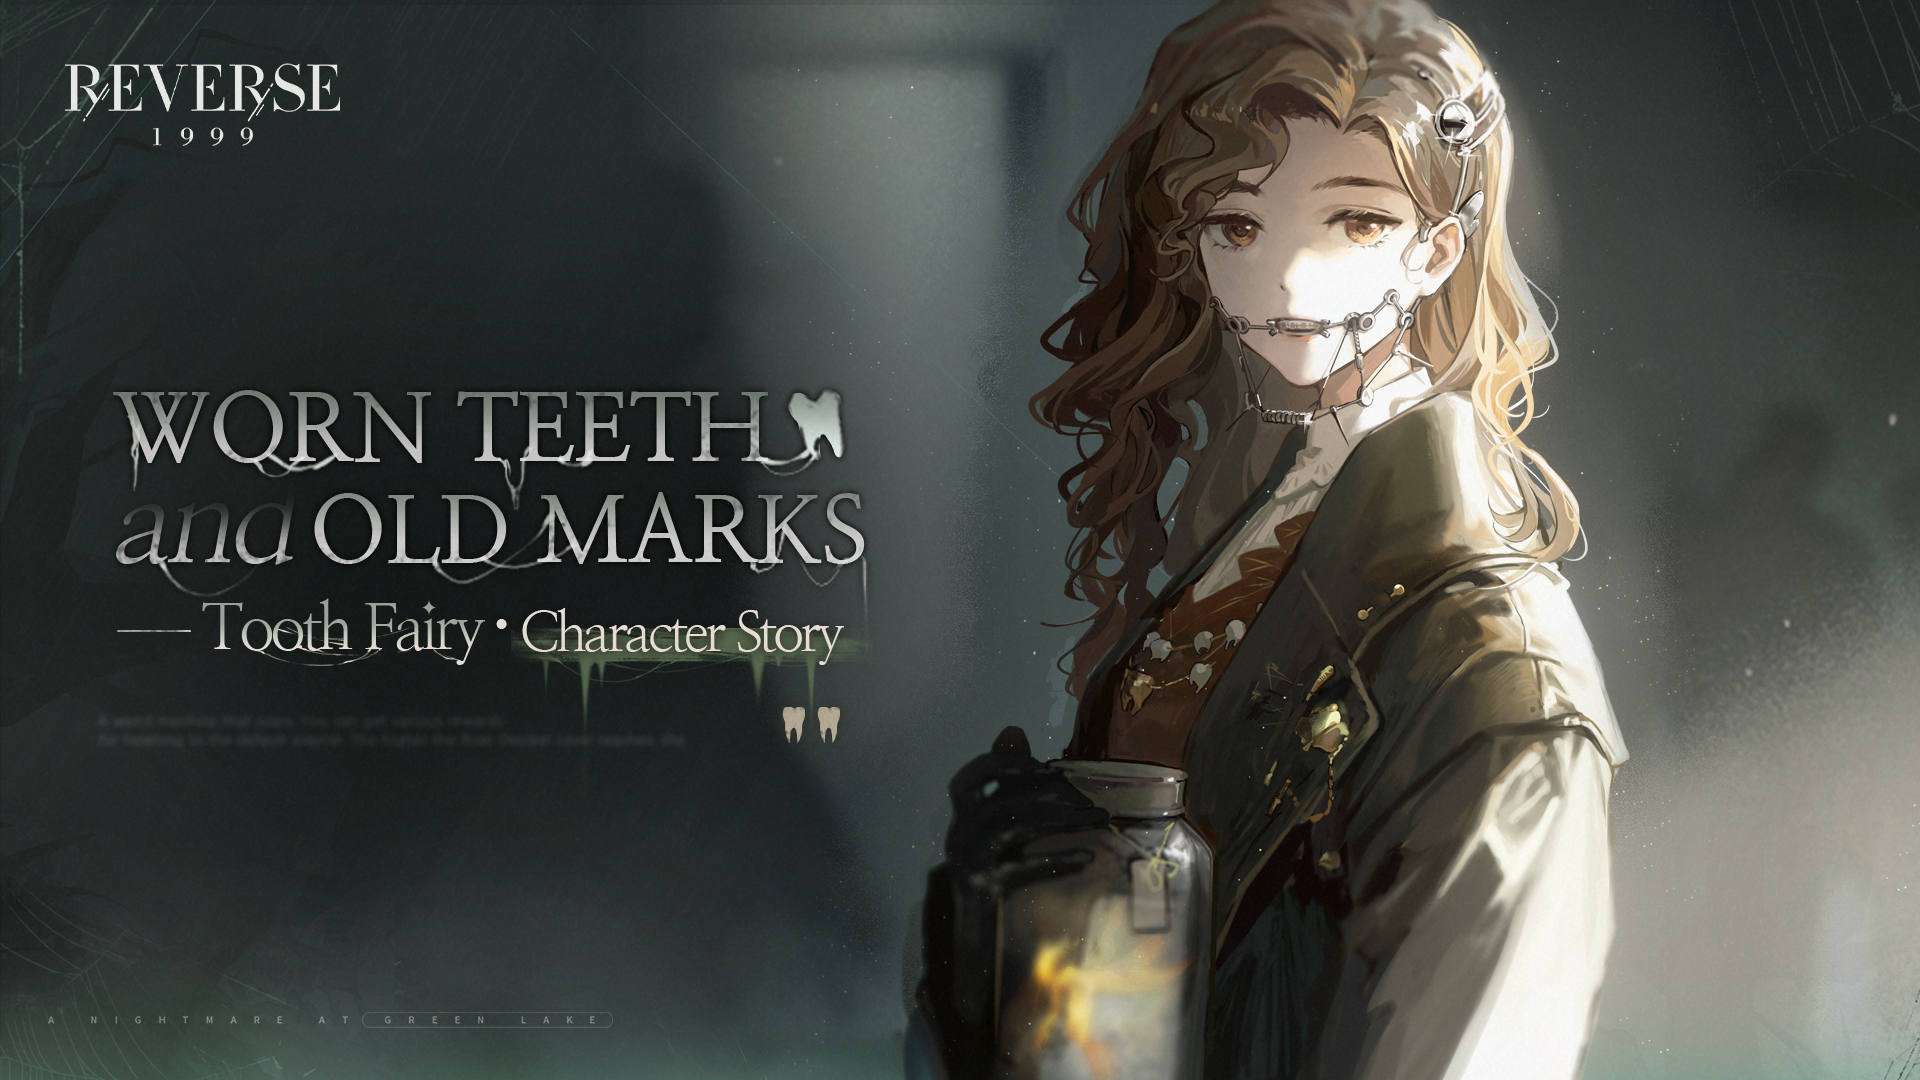 Tooth Fairy - Worn Teeth and Old Marks